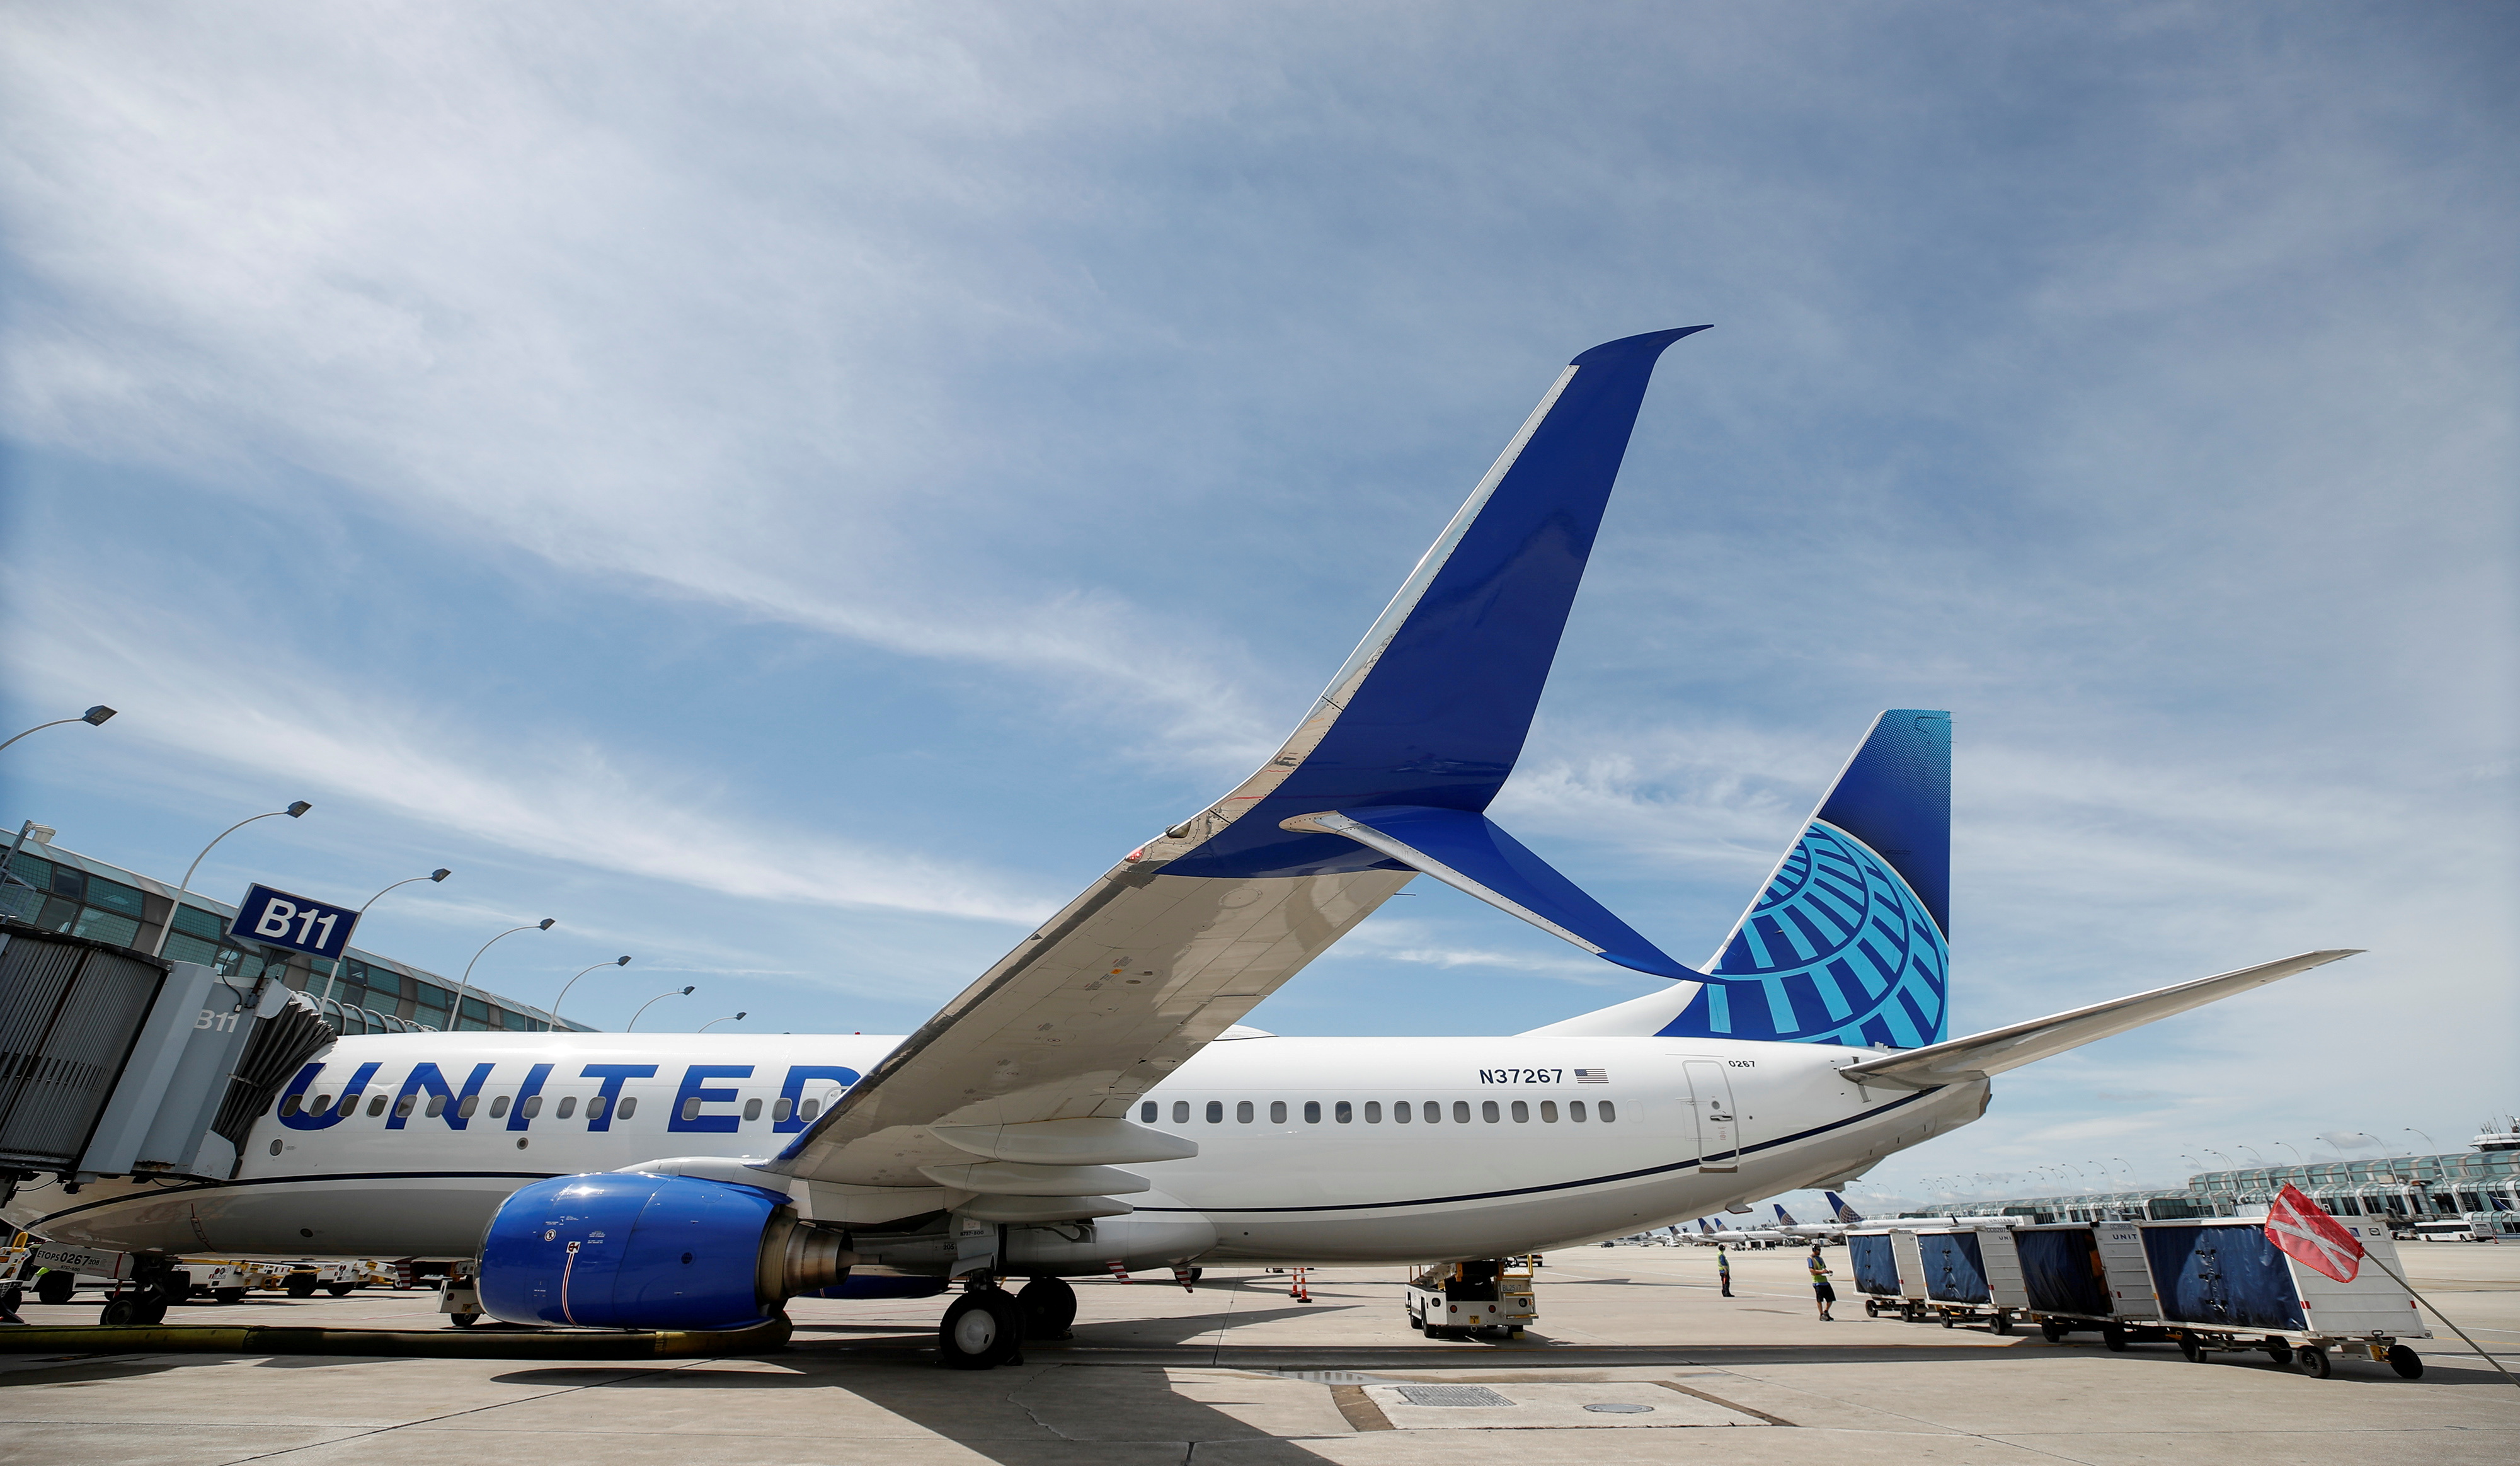 A United Airlines Boeing 737-800 sits at a gate after arriving at O'Hare International Airport in Chicago, Illinois, U.S., June 5, 2019. REUTERS/Kamil Krzaczynski